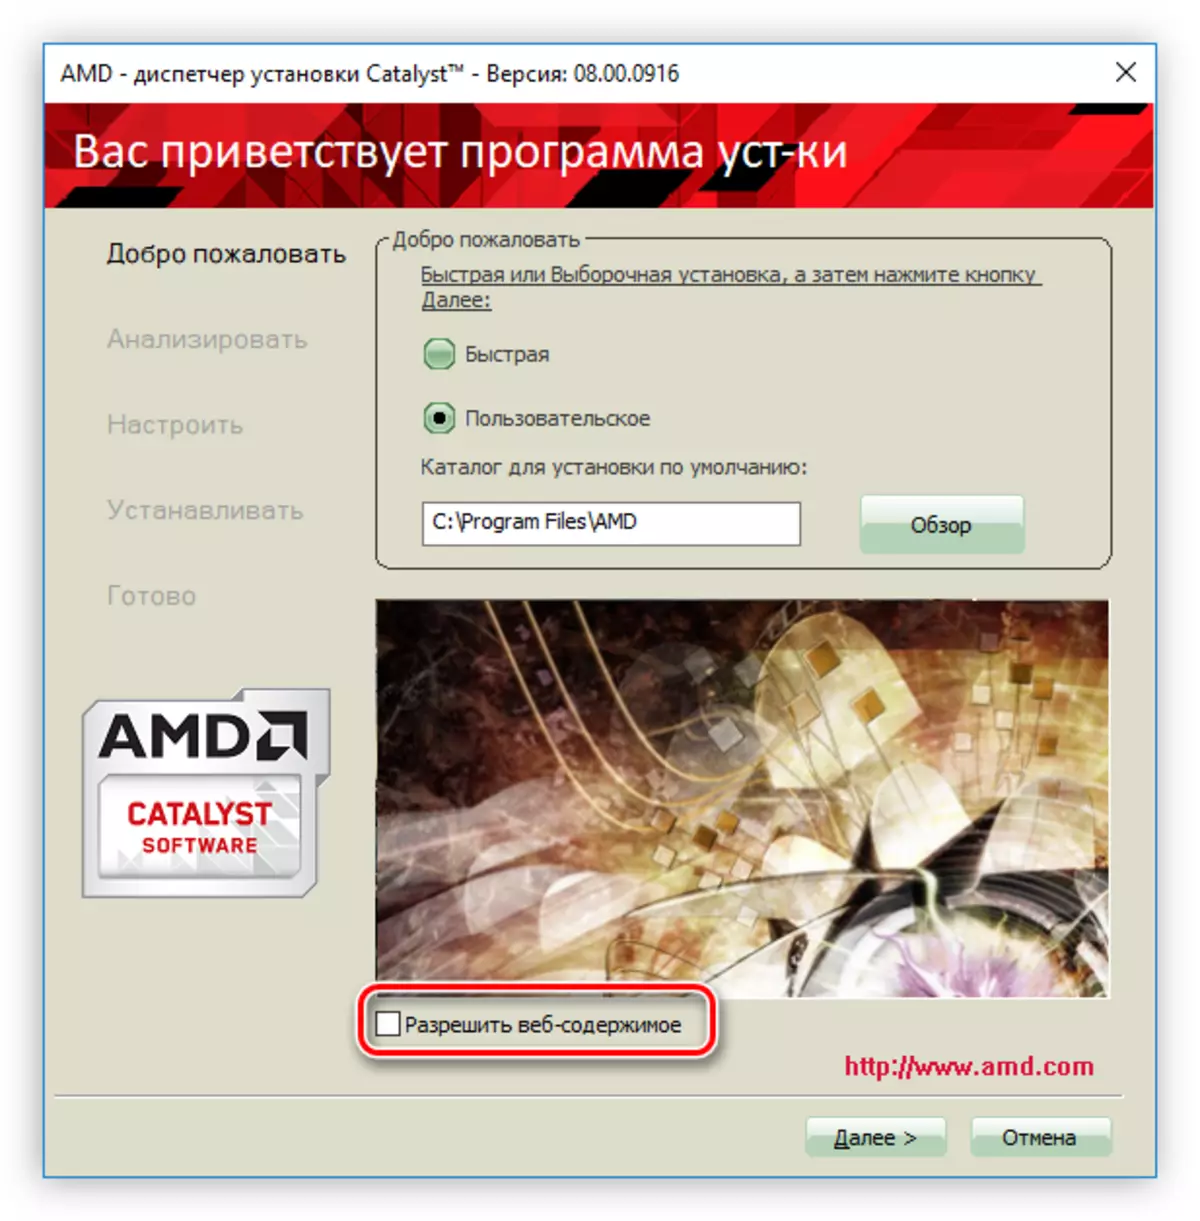 Refusal to display advertising banners in the driver installer for ATI Radeon HD 3600 Series video card